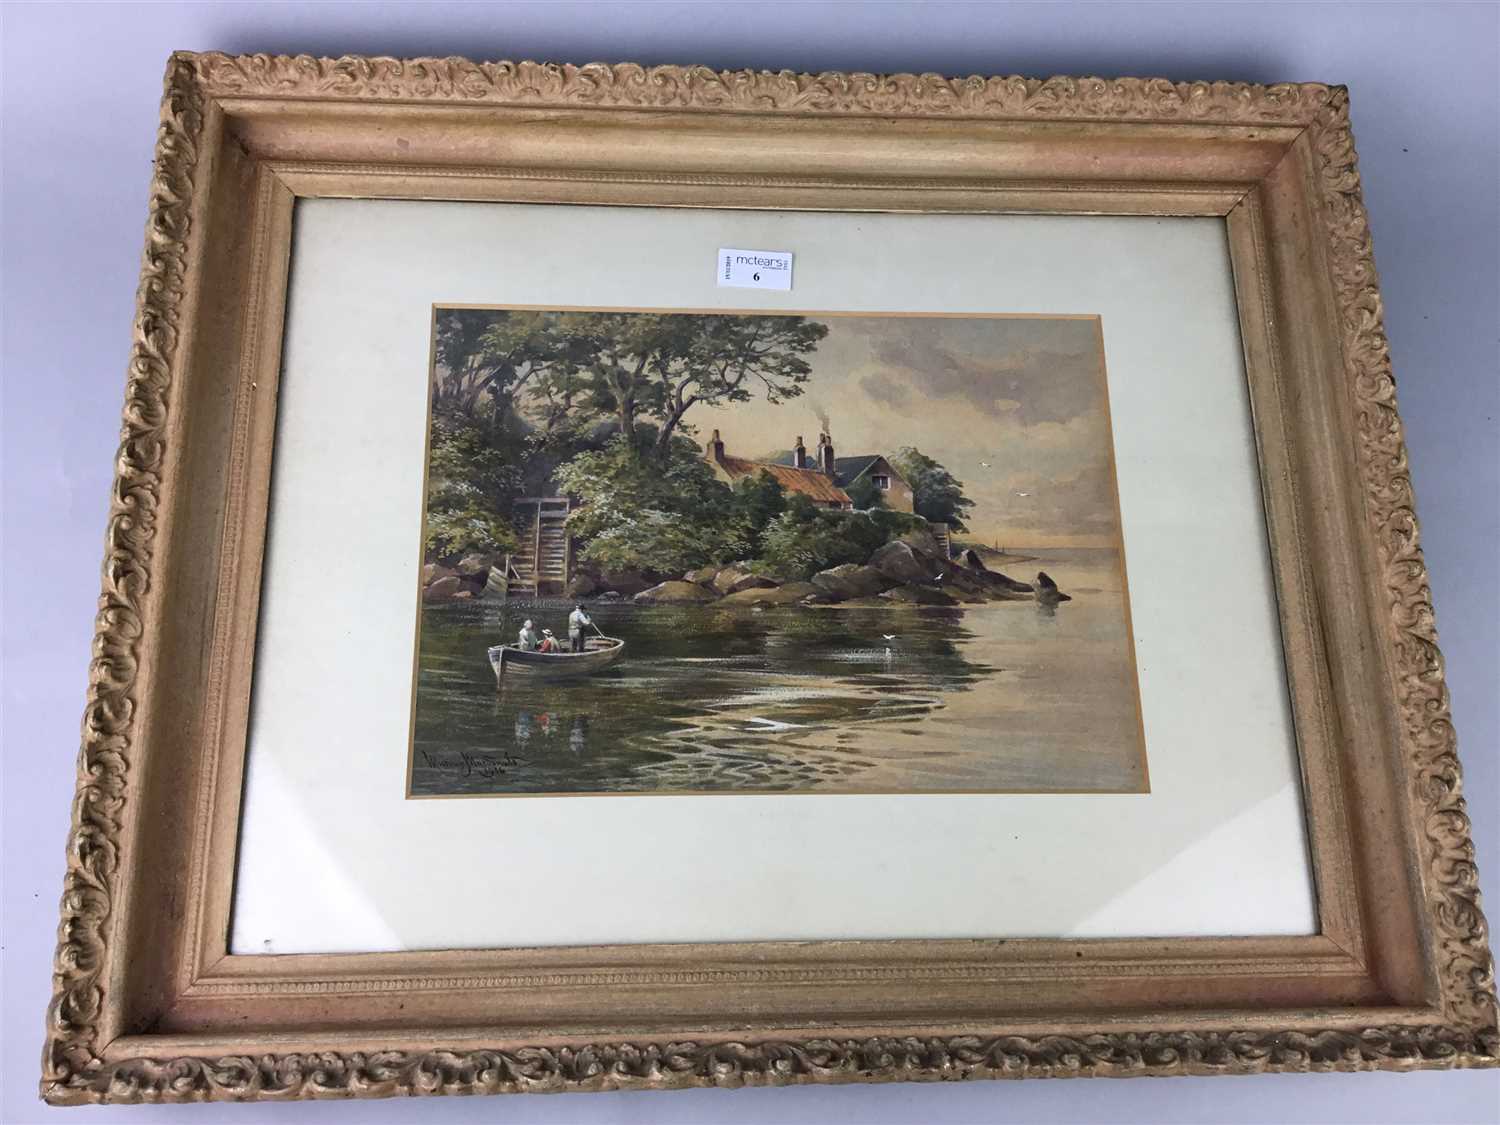 Lot 6 - BOAT IN CALM WATERS, A WATERCOLOUR BY MURRAY MACDONALD